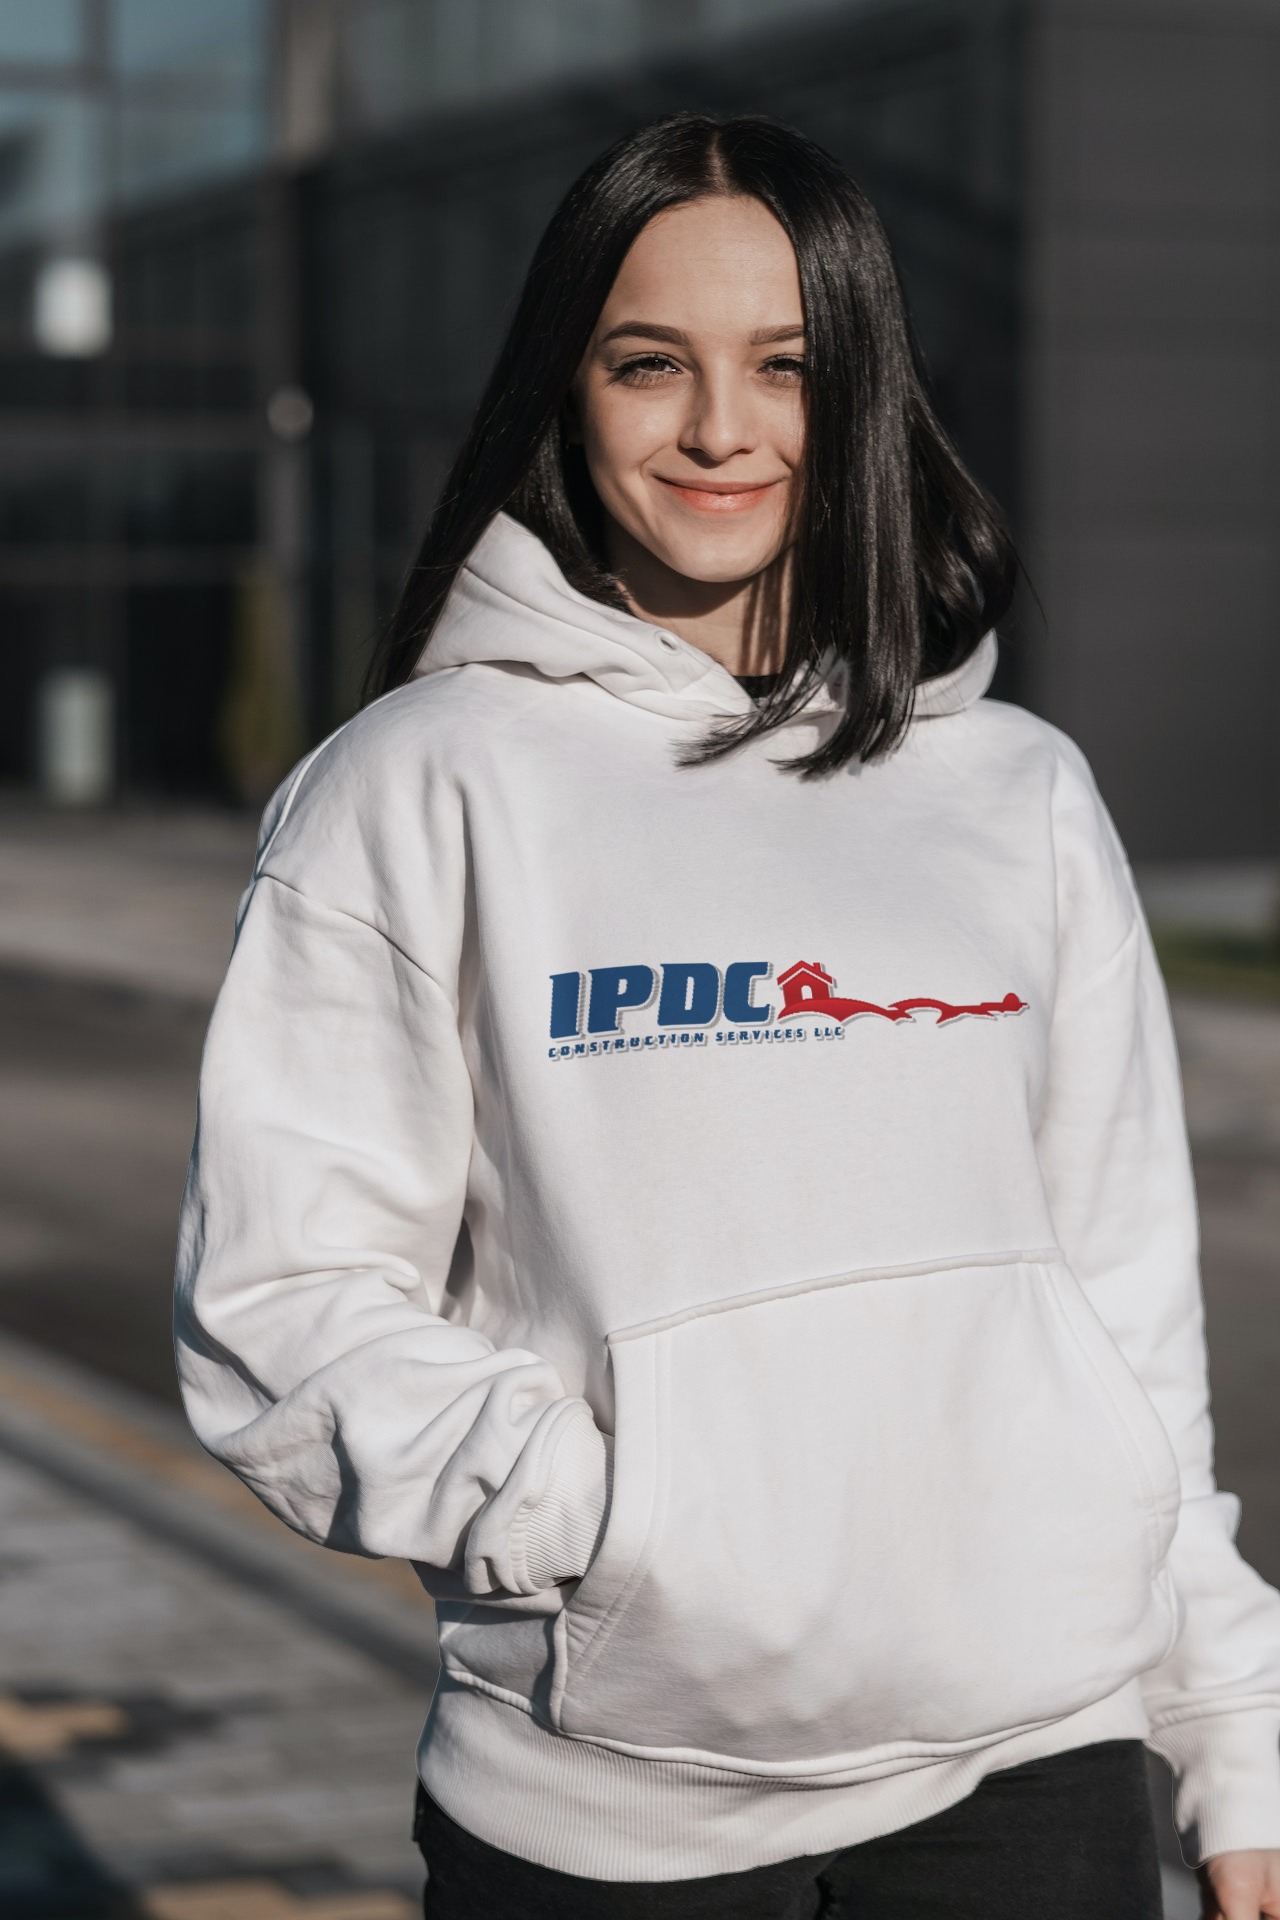 ipdc-construction-services-logo-2